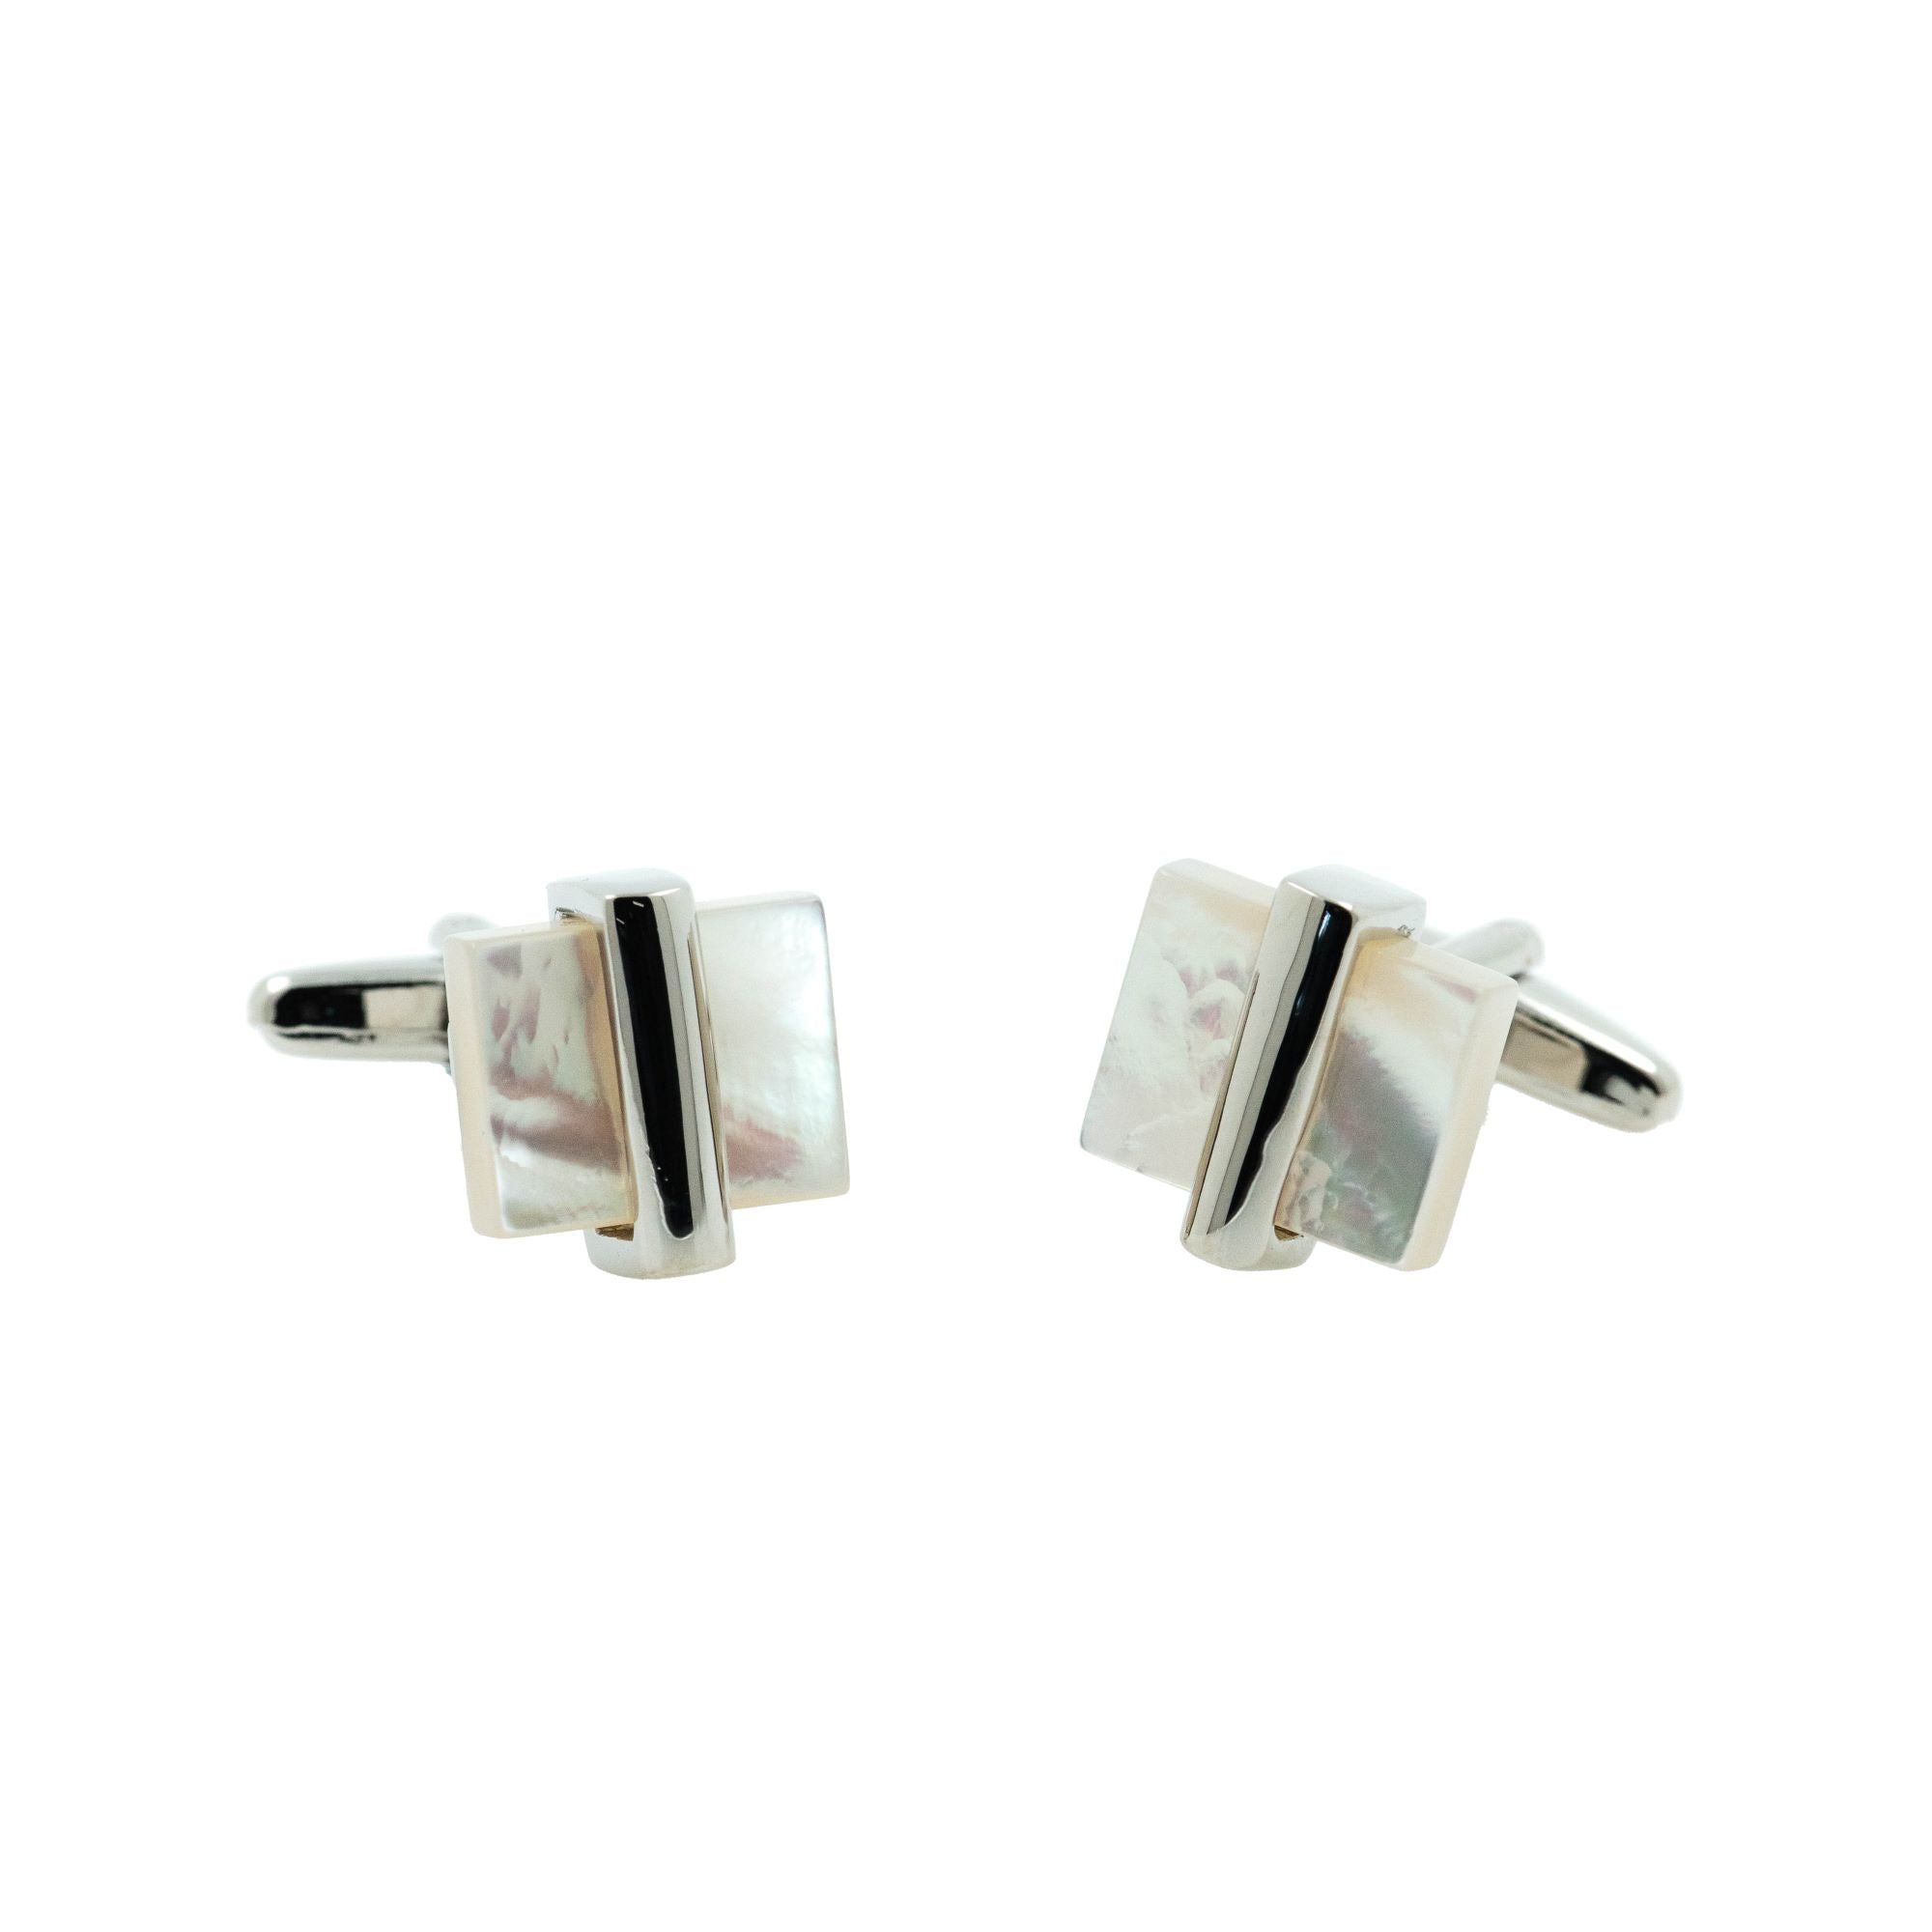 Rustic Mother Of Pearl Cufflinks